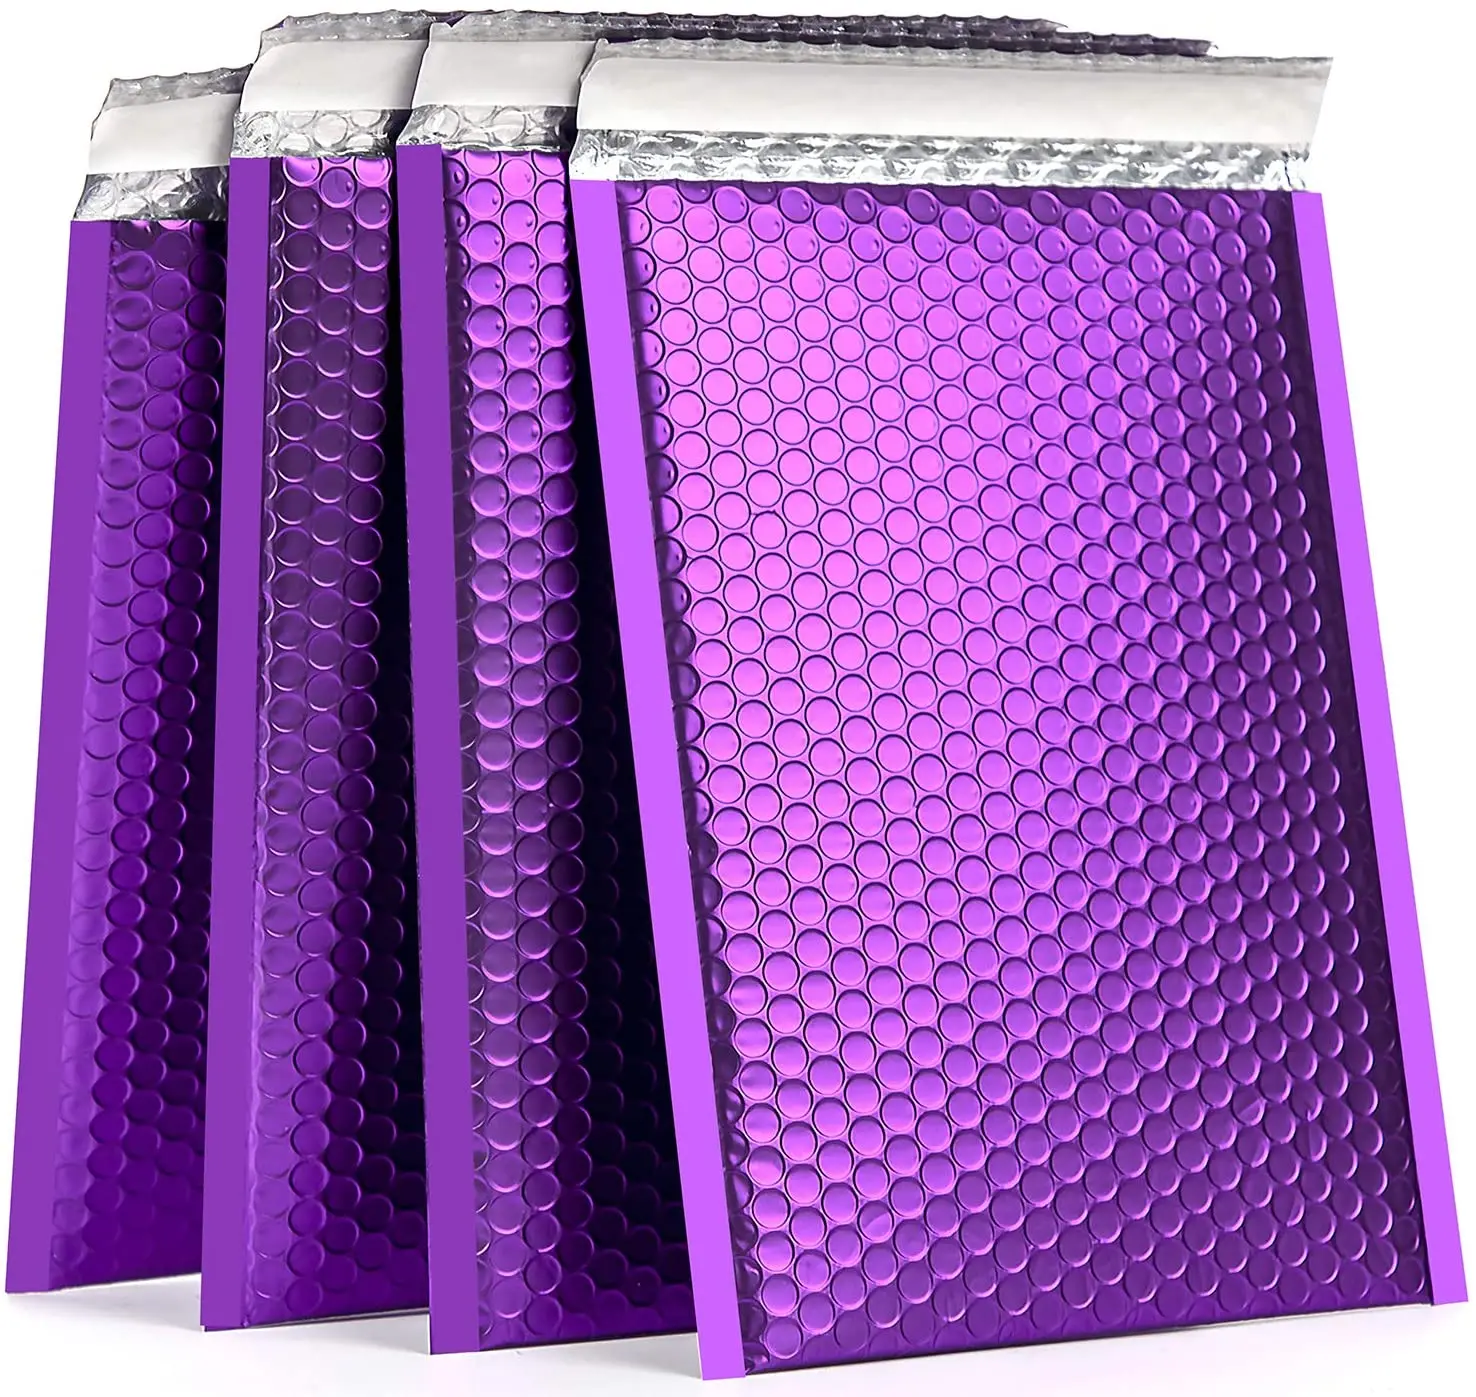 METALLIC PADDED BAGS ENVELOPES 'ALL SIZES' ALL COURIER LILAC CHEAPER MAILER 